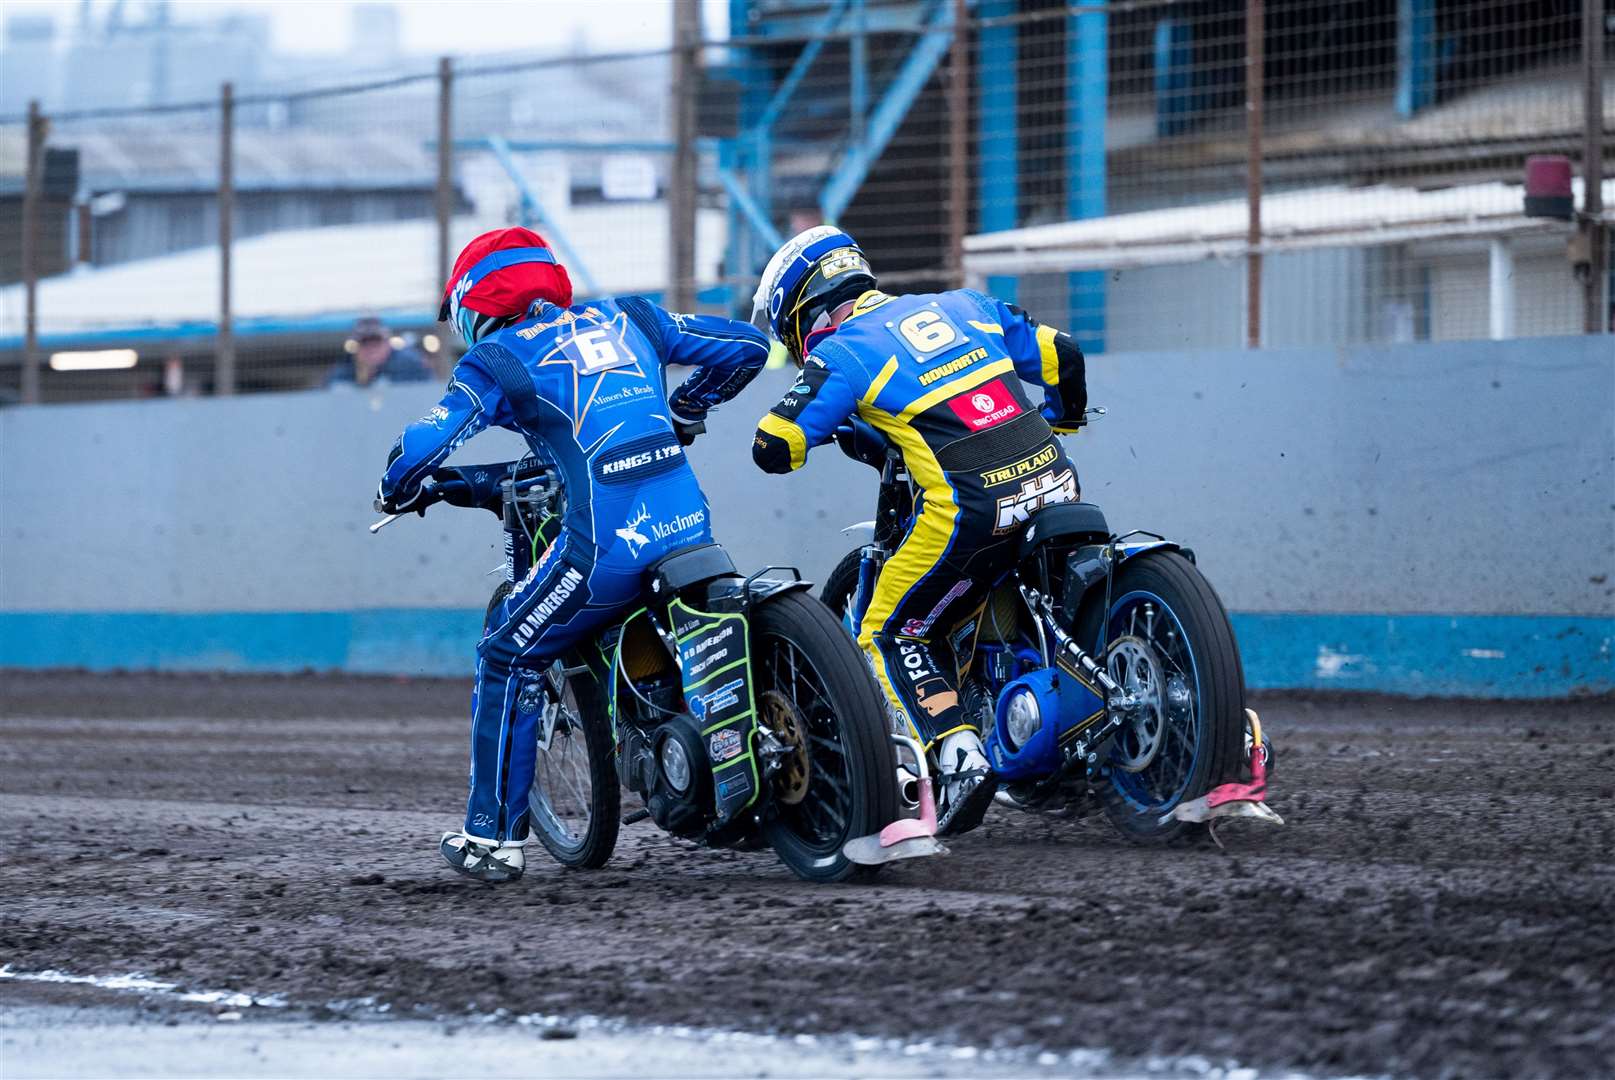 The King's Lynn Stars against Sheffield Tigers at the Adrian Flux Arena on Thursday night.